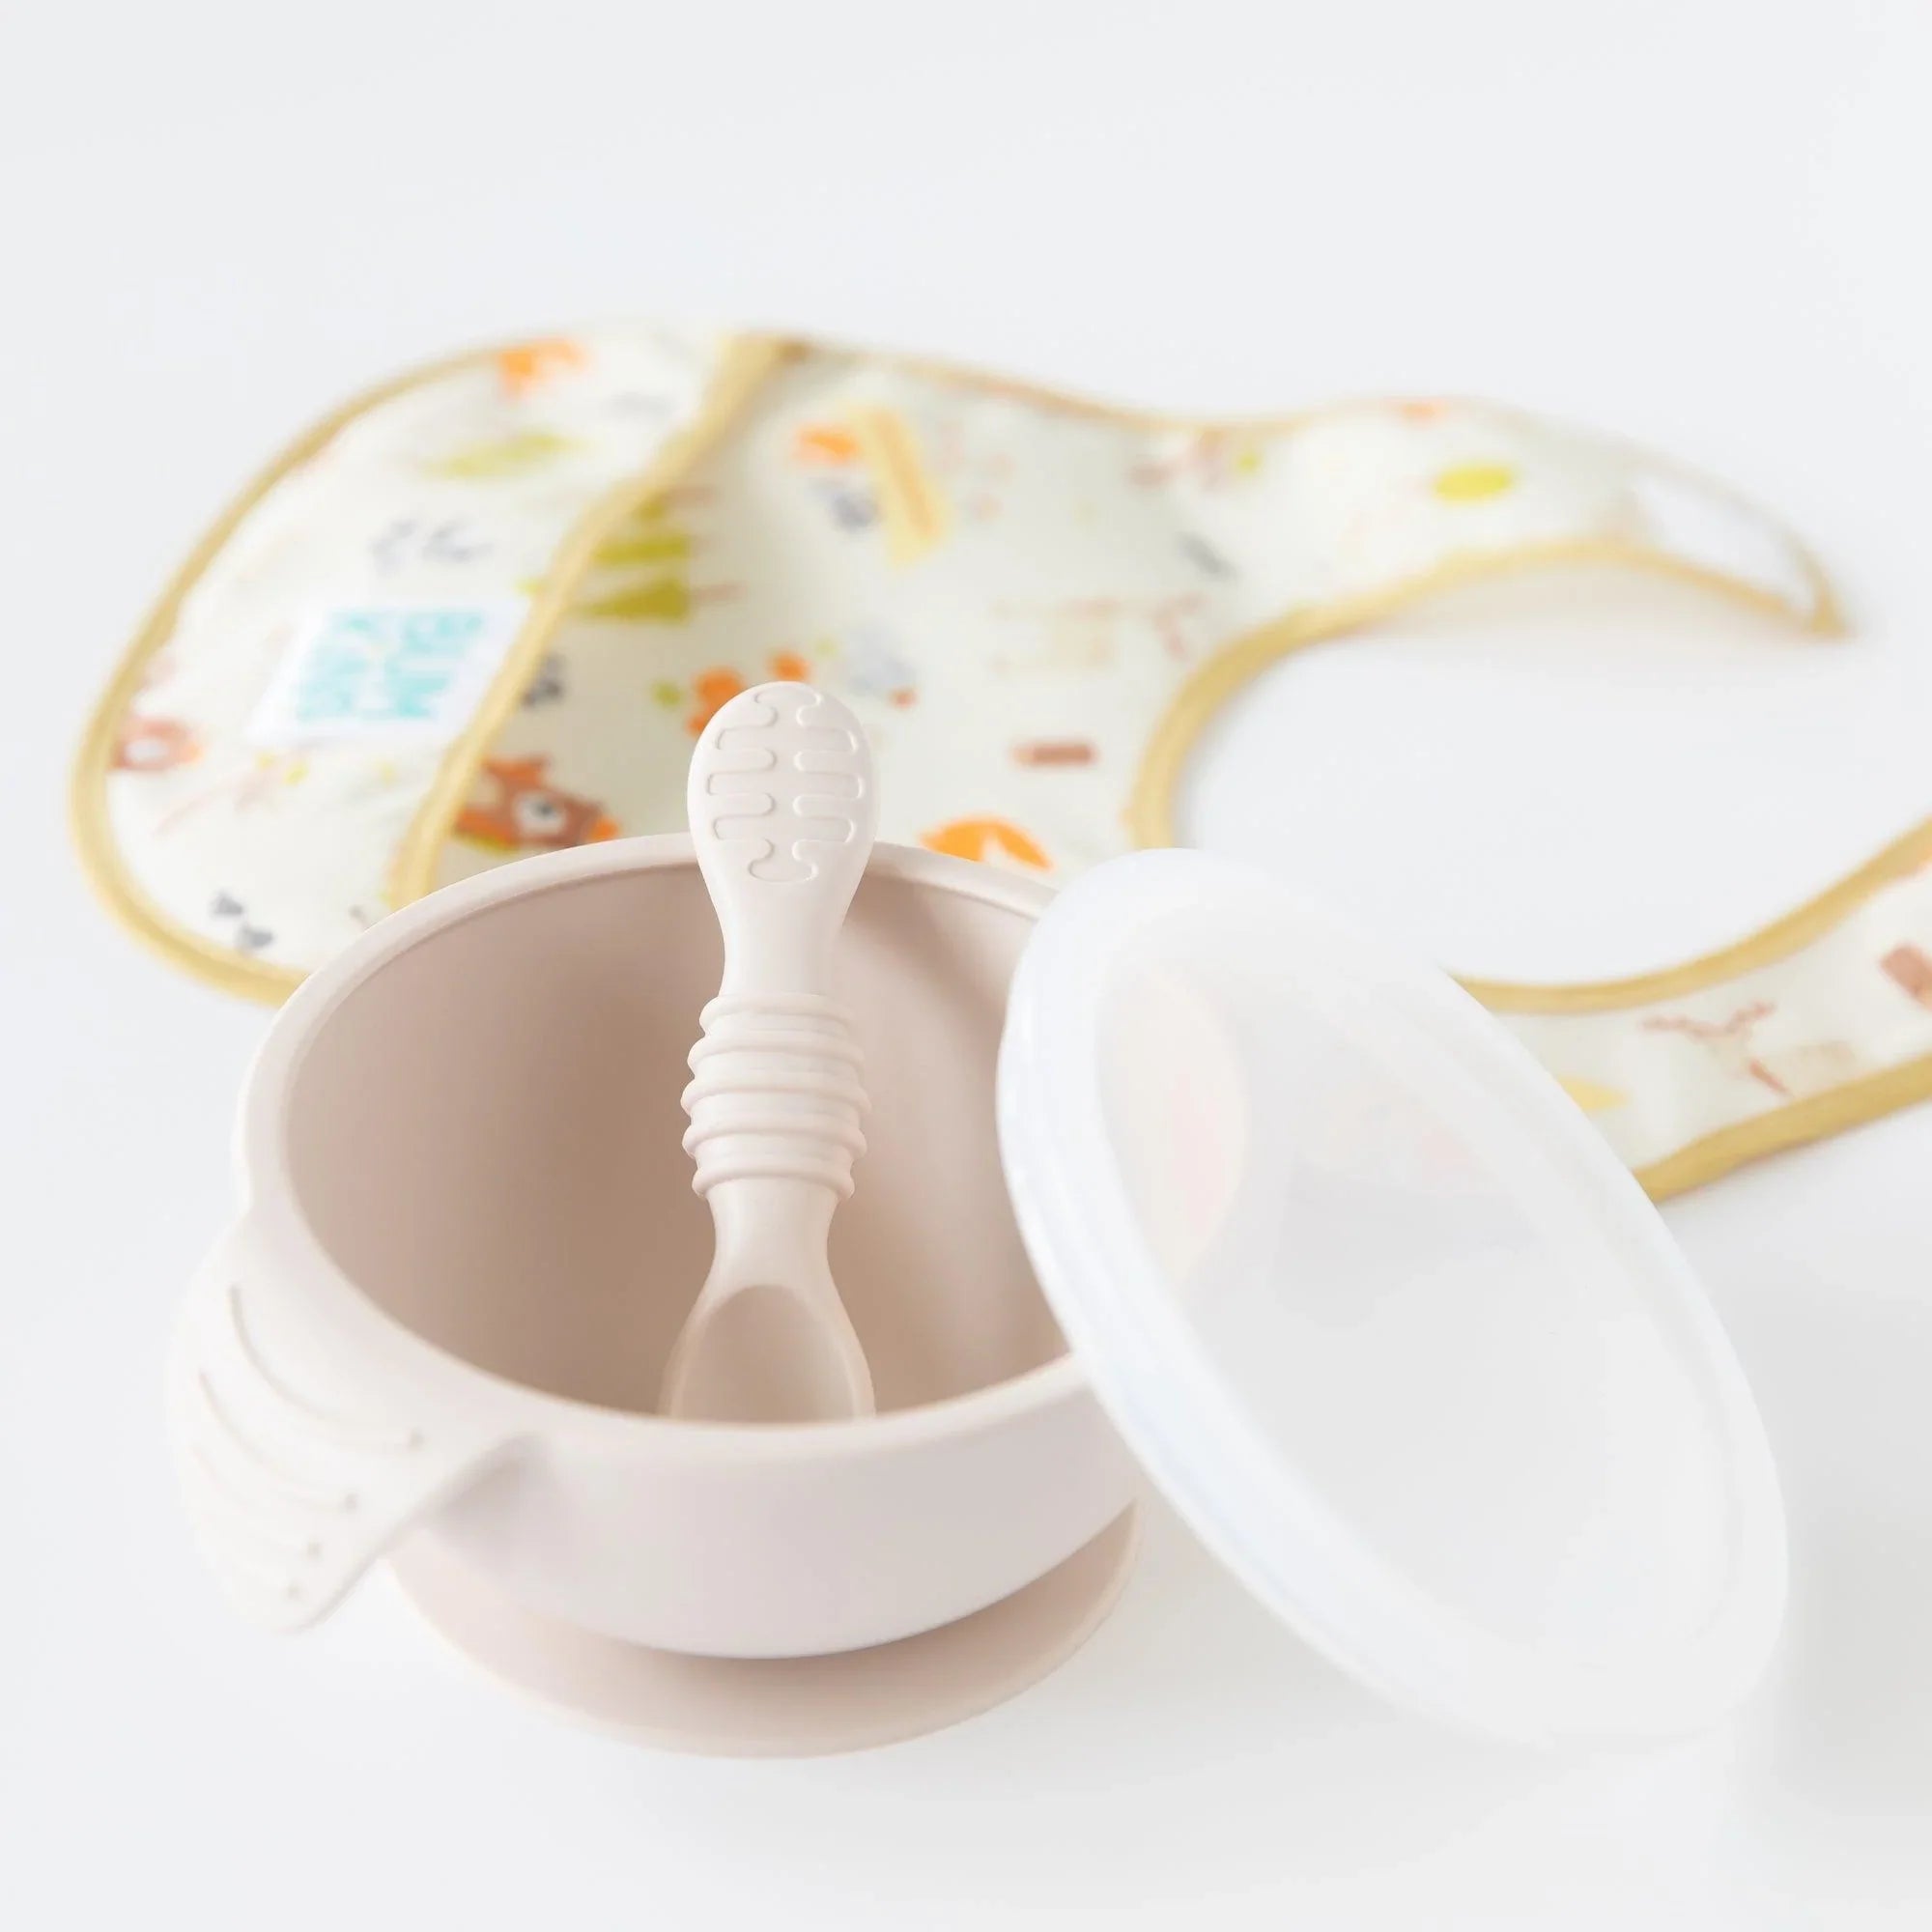 Bumkins Silicone First Feeding Set with Lid & Spoon in Sage